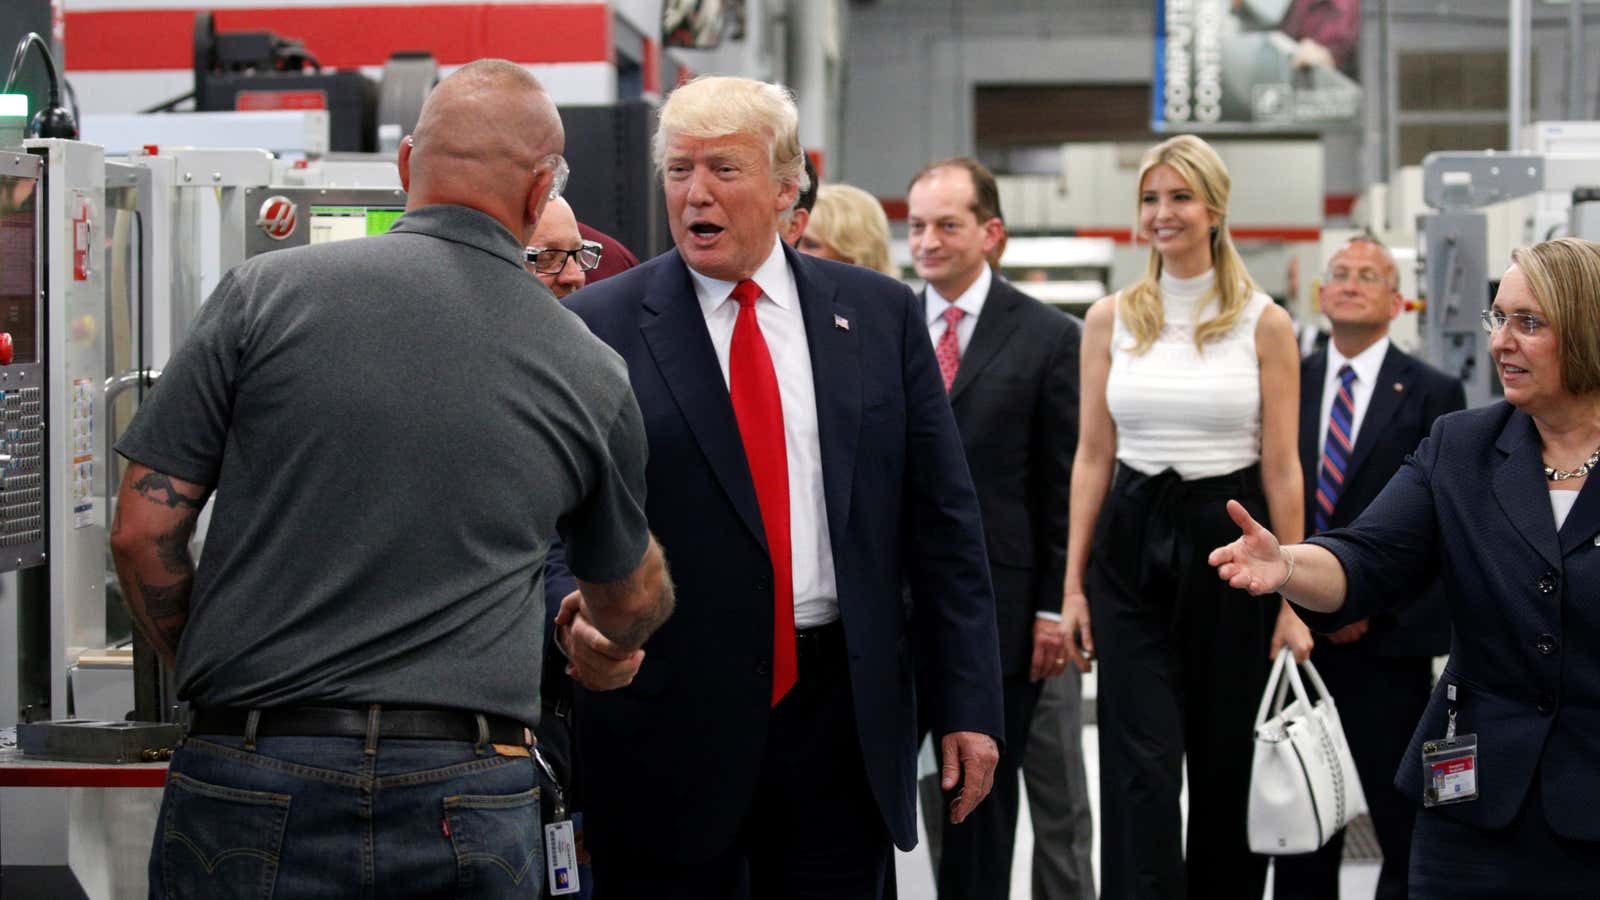 U.S. President Donald Trump shakes hands as he tours Waukesha County Technical College as part of “workforce development week.”